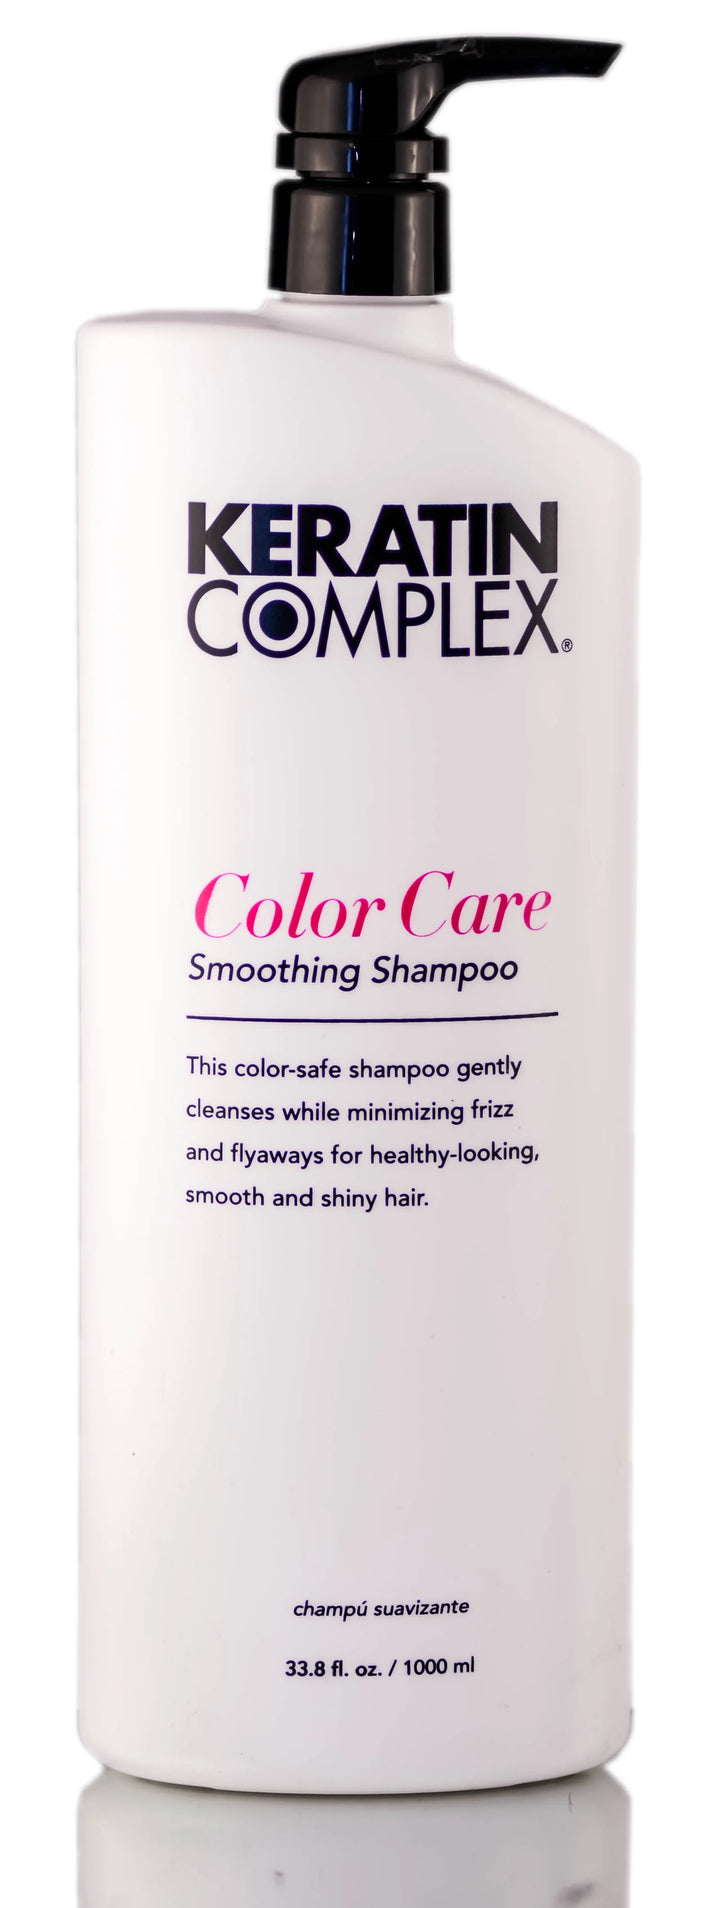 Keratin Complex Color Care Smoothing Shampoo image of 33.8 oz bottle